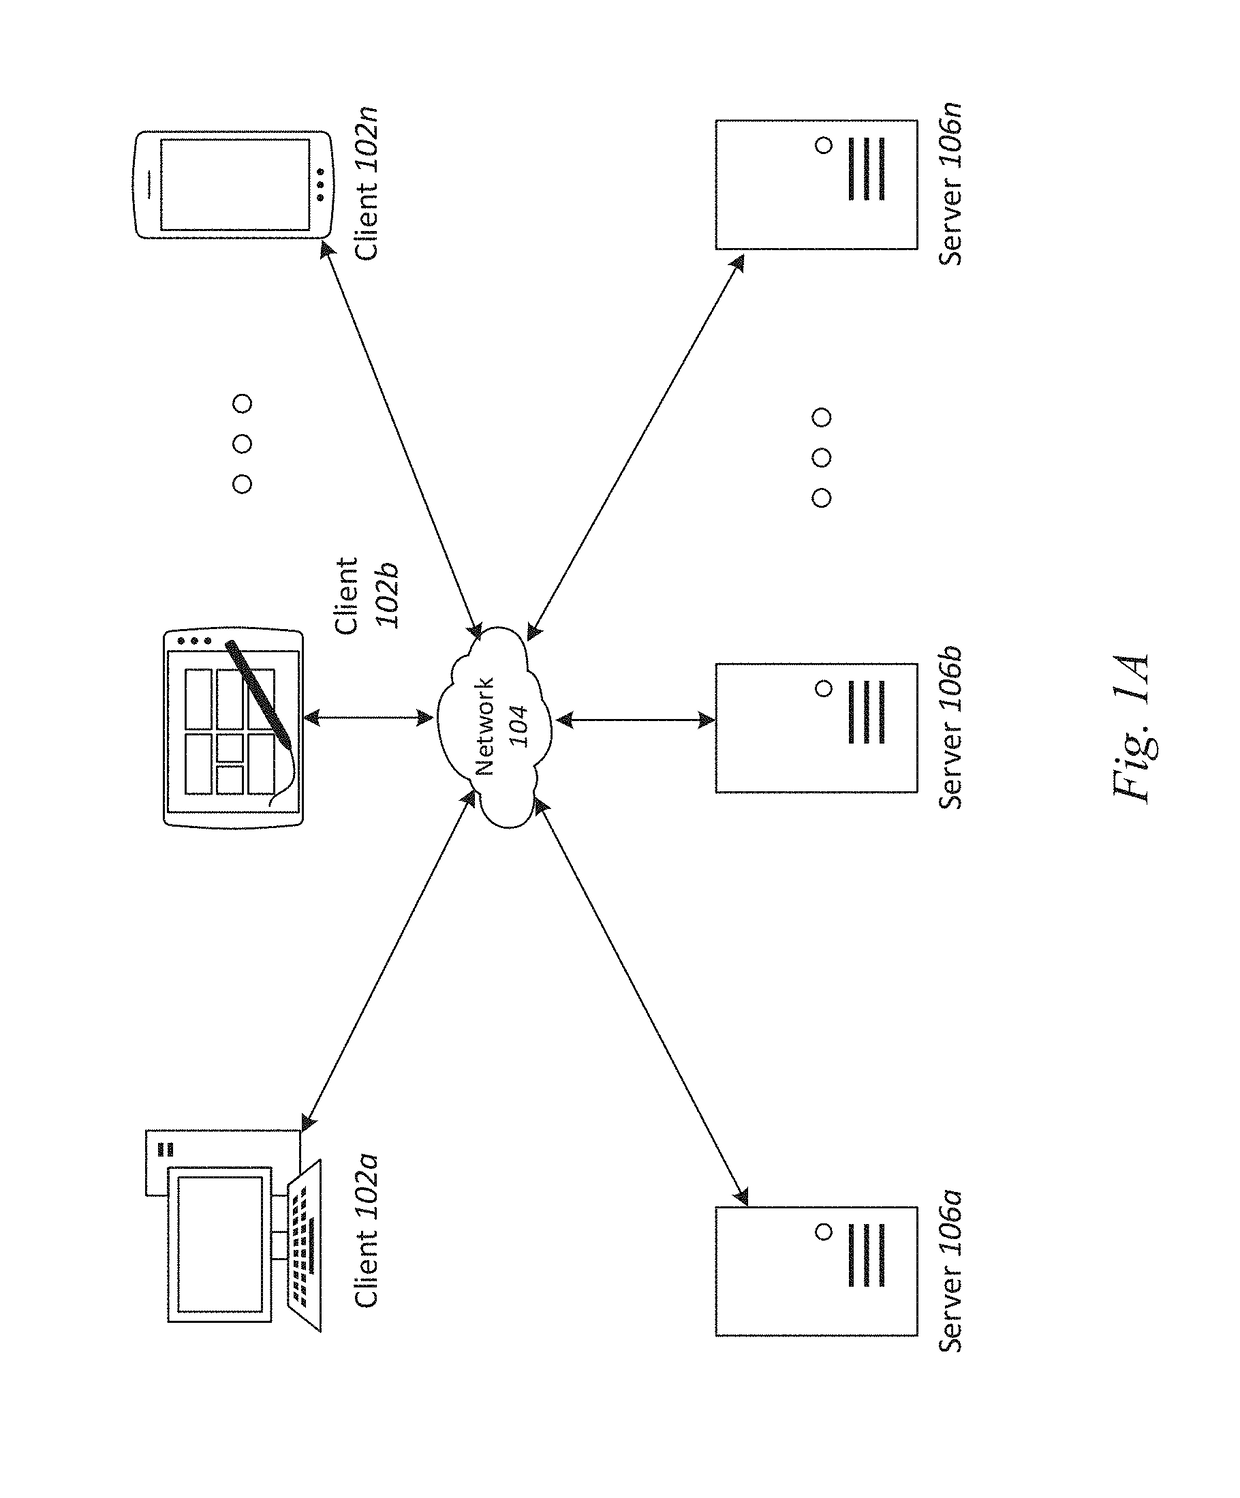 Systems and methods for discovering and alerting users of potentially hazardous messages